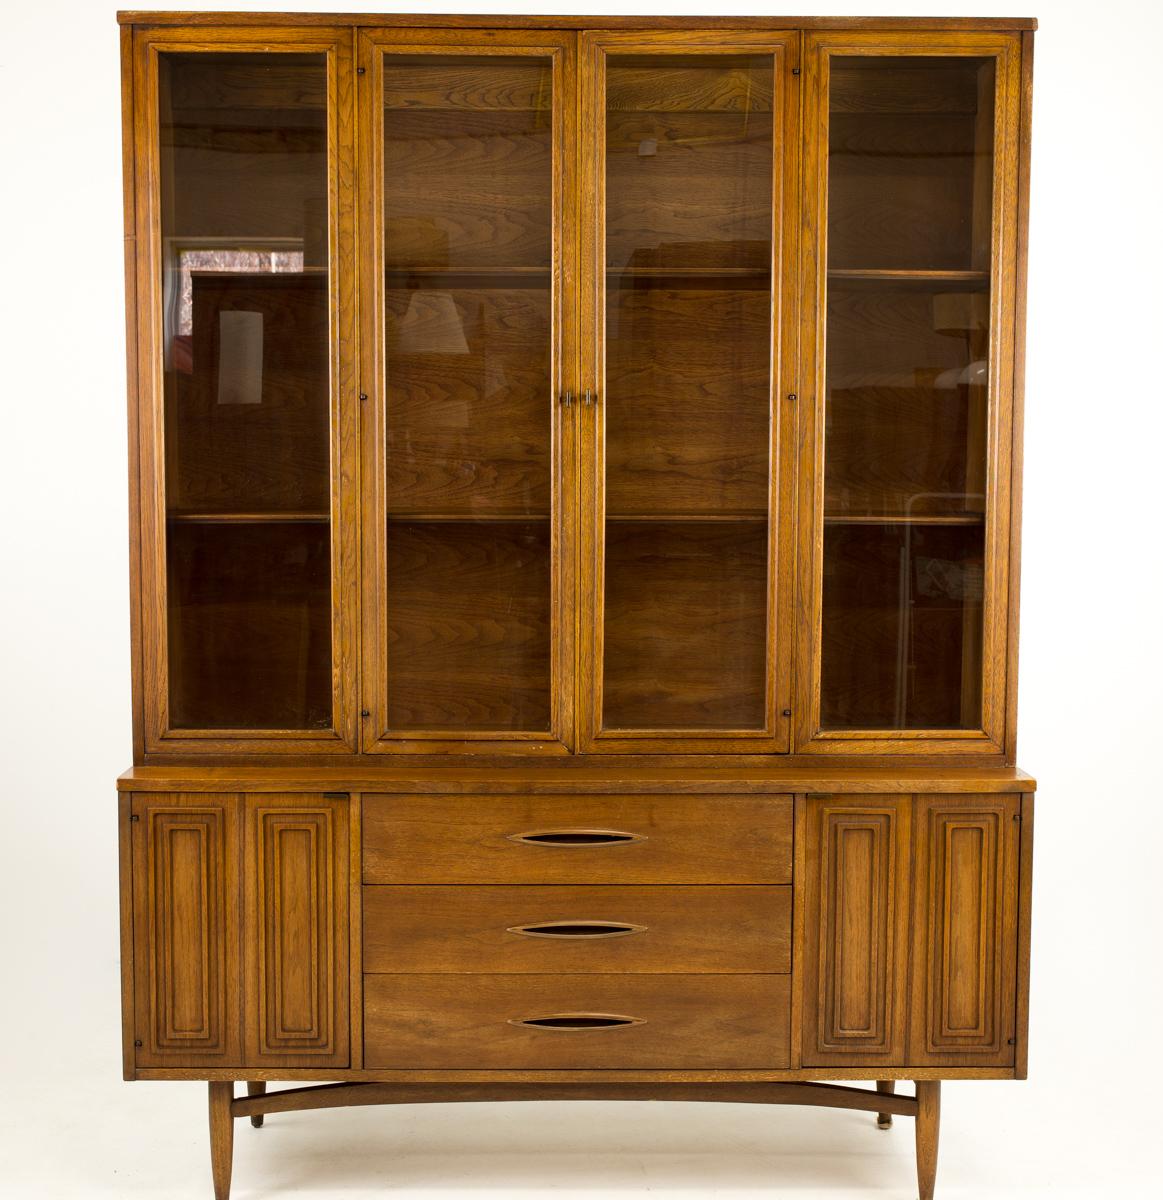 Broyhill Premier Sculptra Mid Century China Cabinet

This cabinet measures: 58 wide x 17 deep x 77 inches high

All pieces of furniture can be had in what we call restored vintage condition. That means the piece is restored upon purchase so it’s